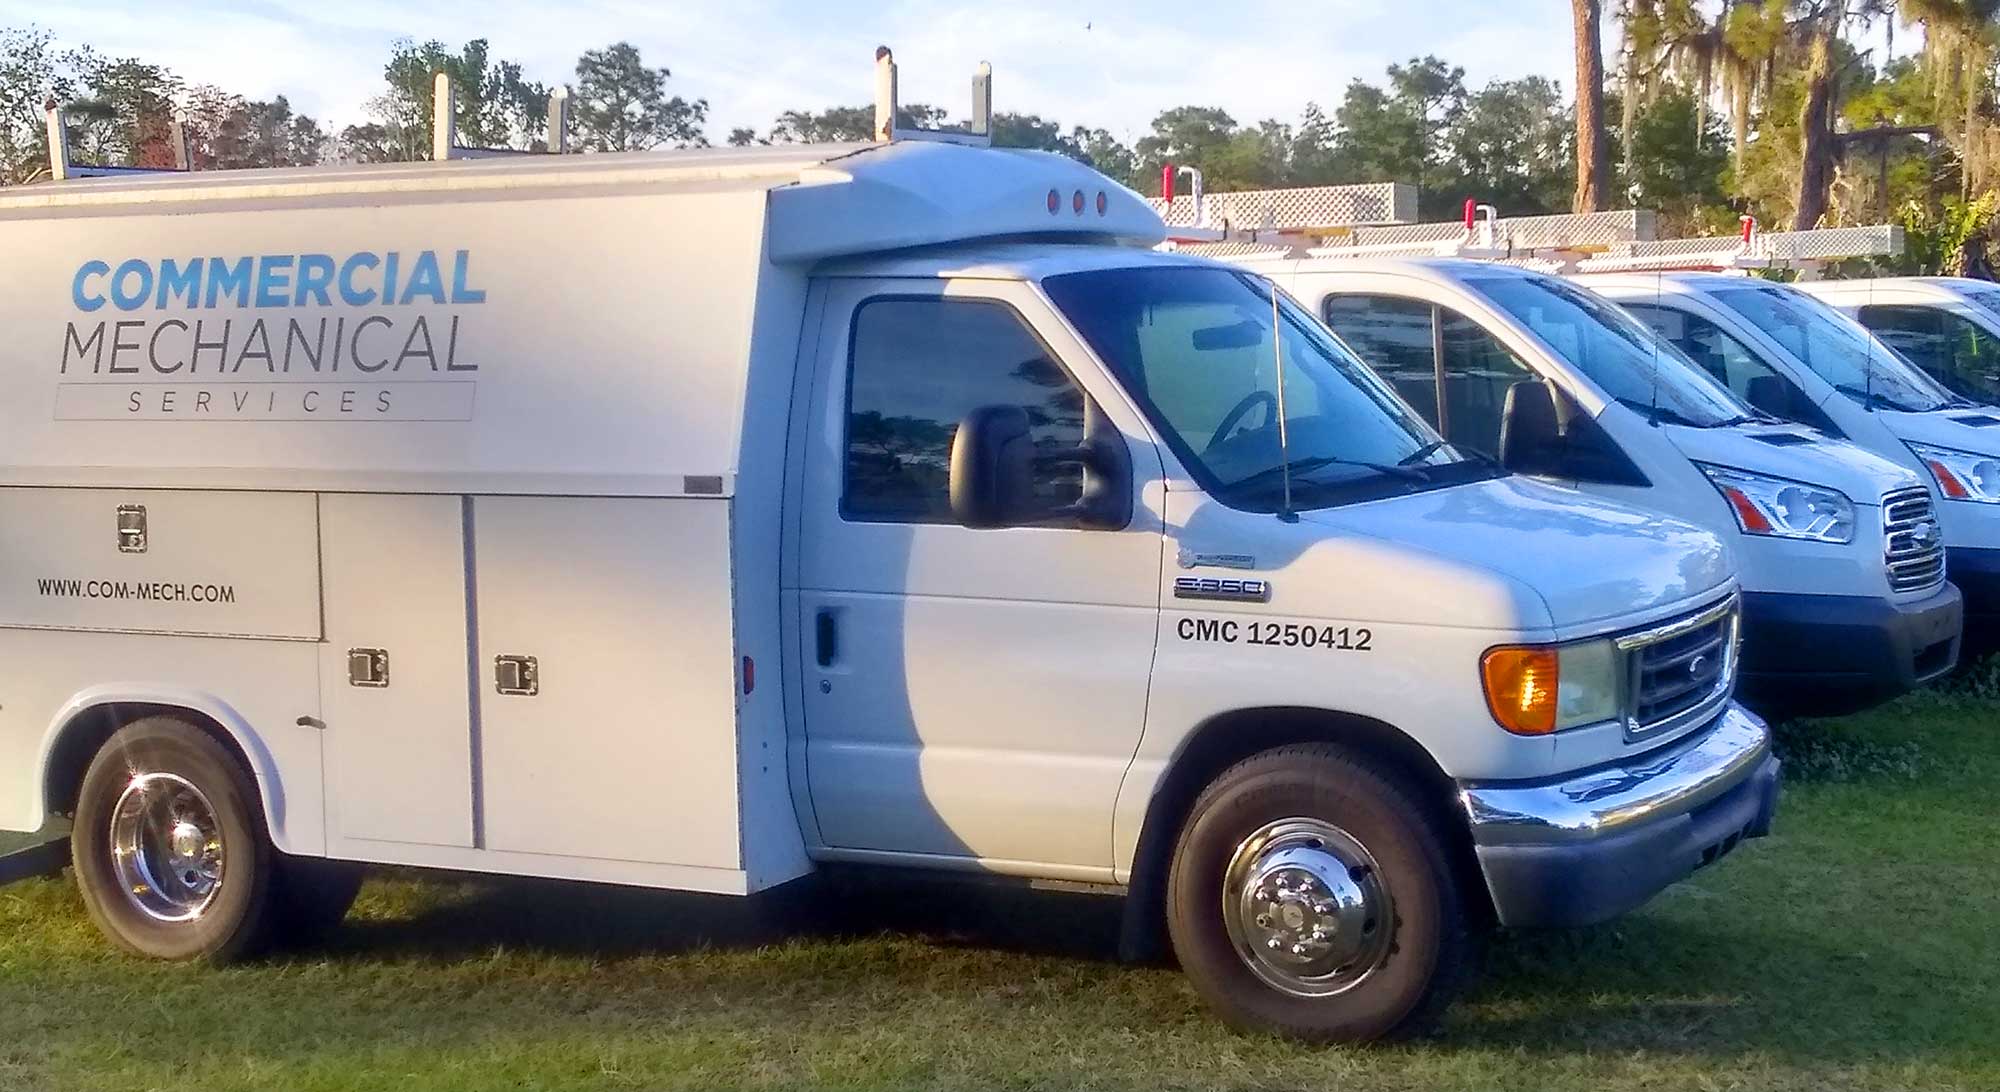 Commercial Mechanical Services Work Vehicle, Commercial HVAC Services